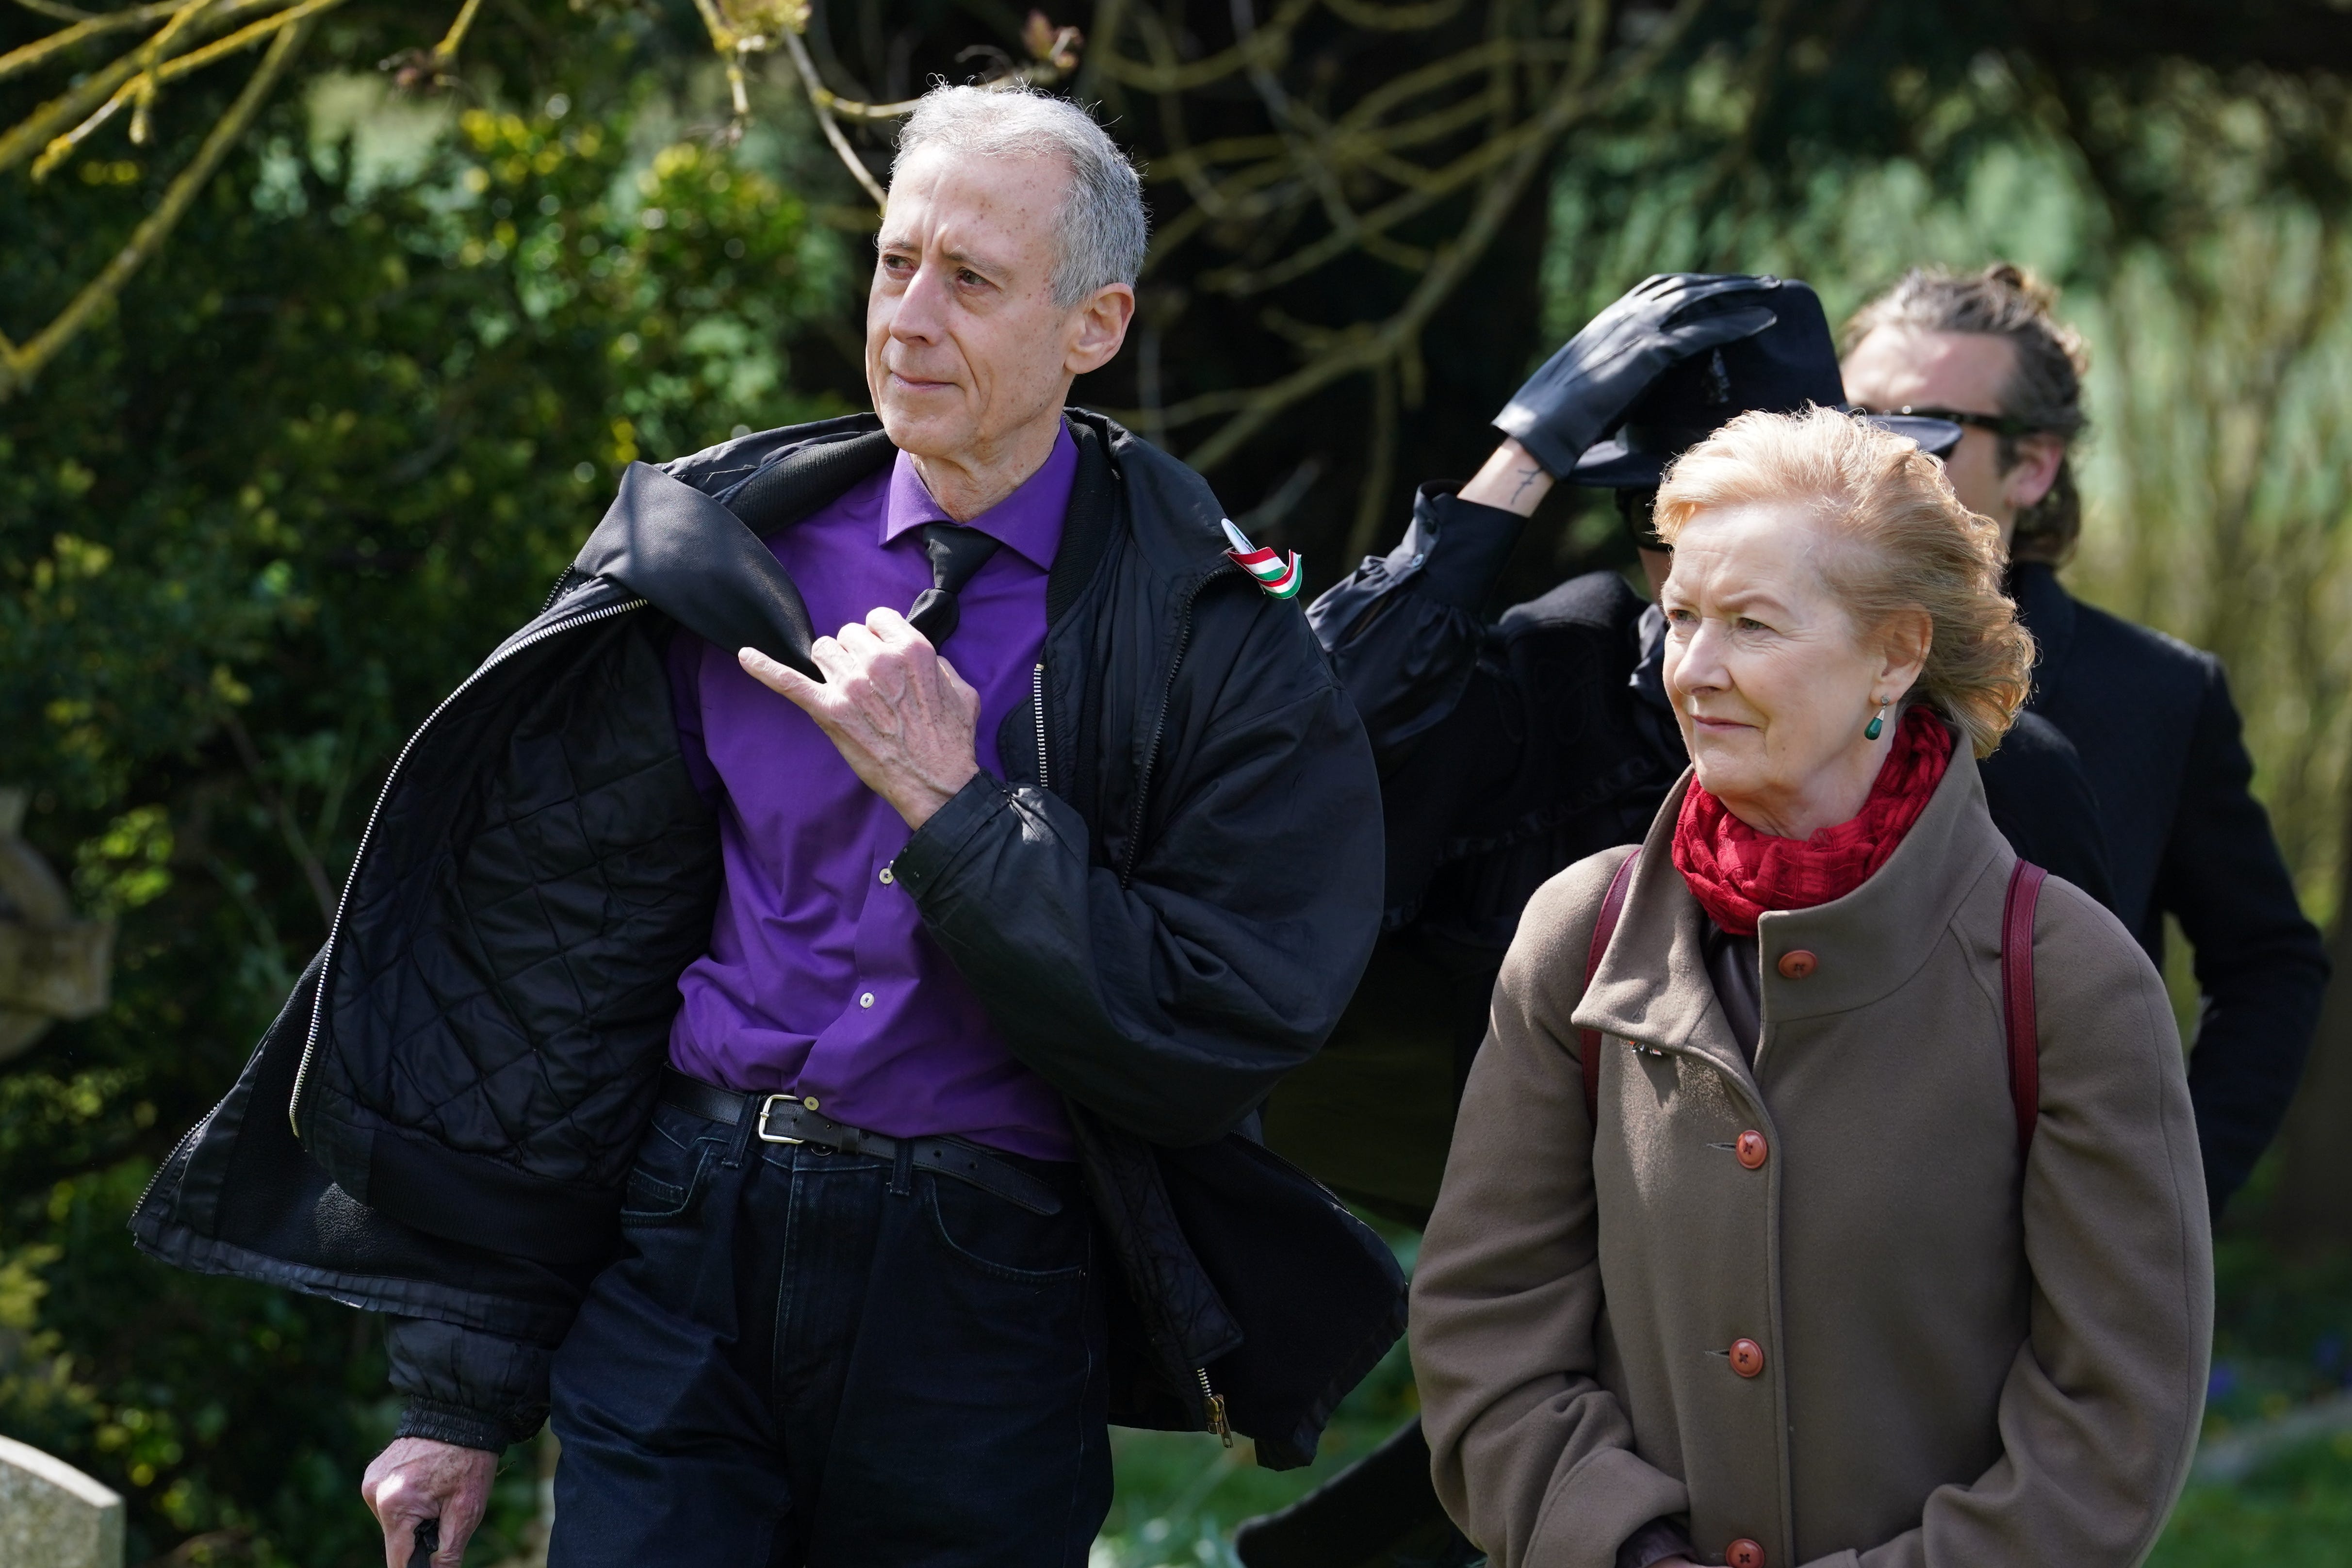 Campaigner Peter Tatchell arrives for the service